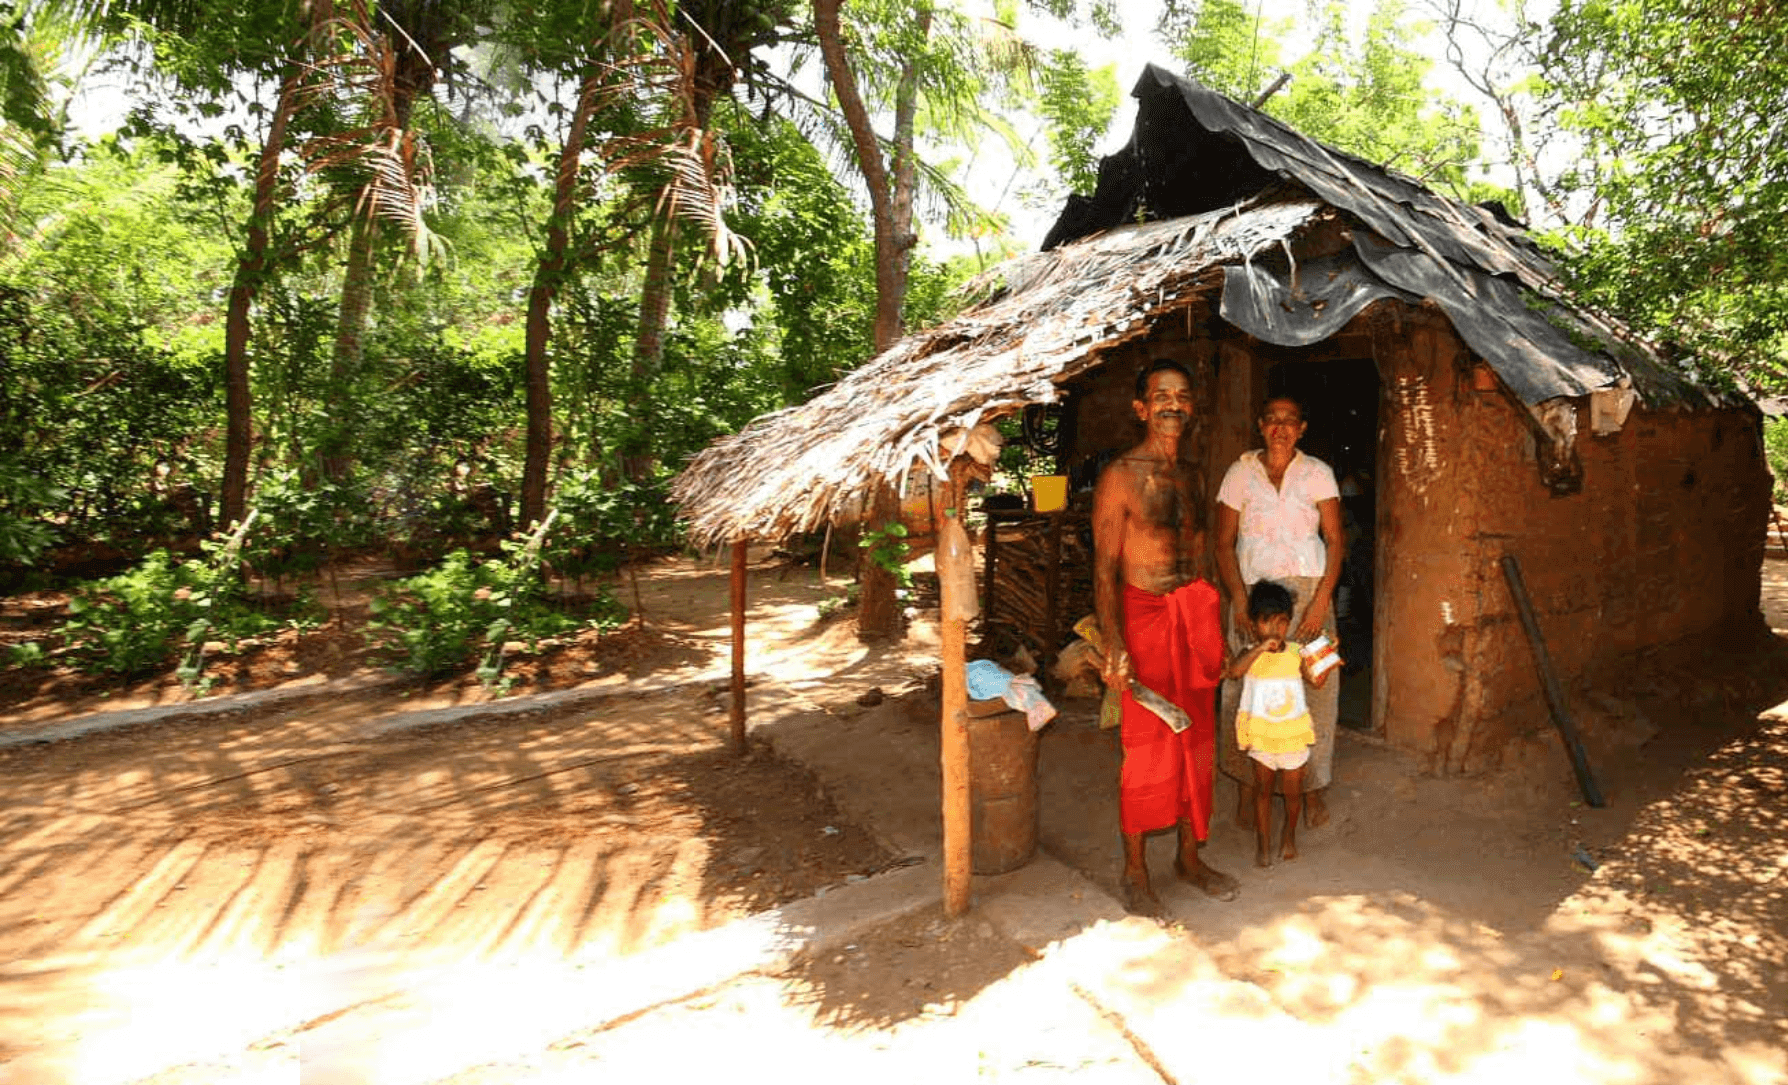 A photo of a small family in rural 'mud' house in Yala countryside Sri Lanka